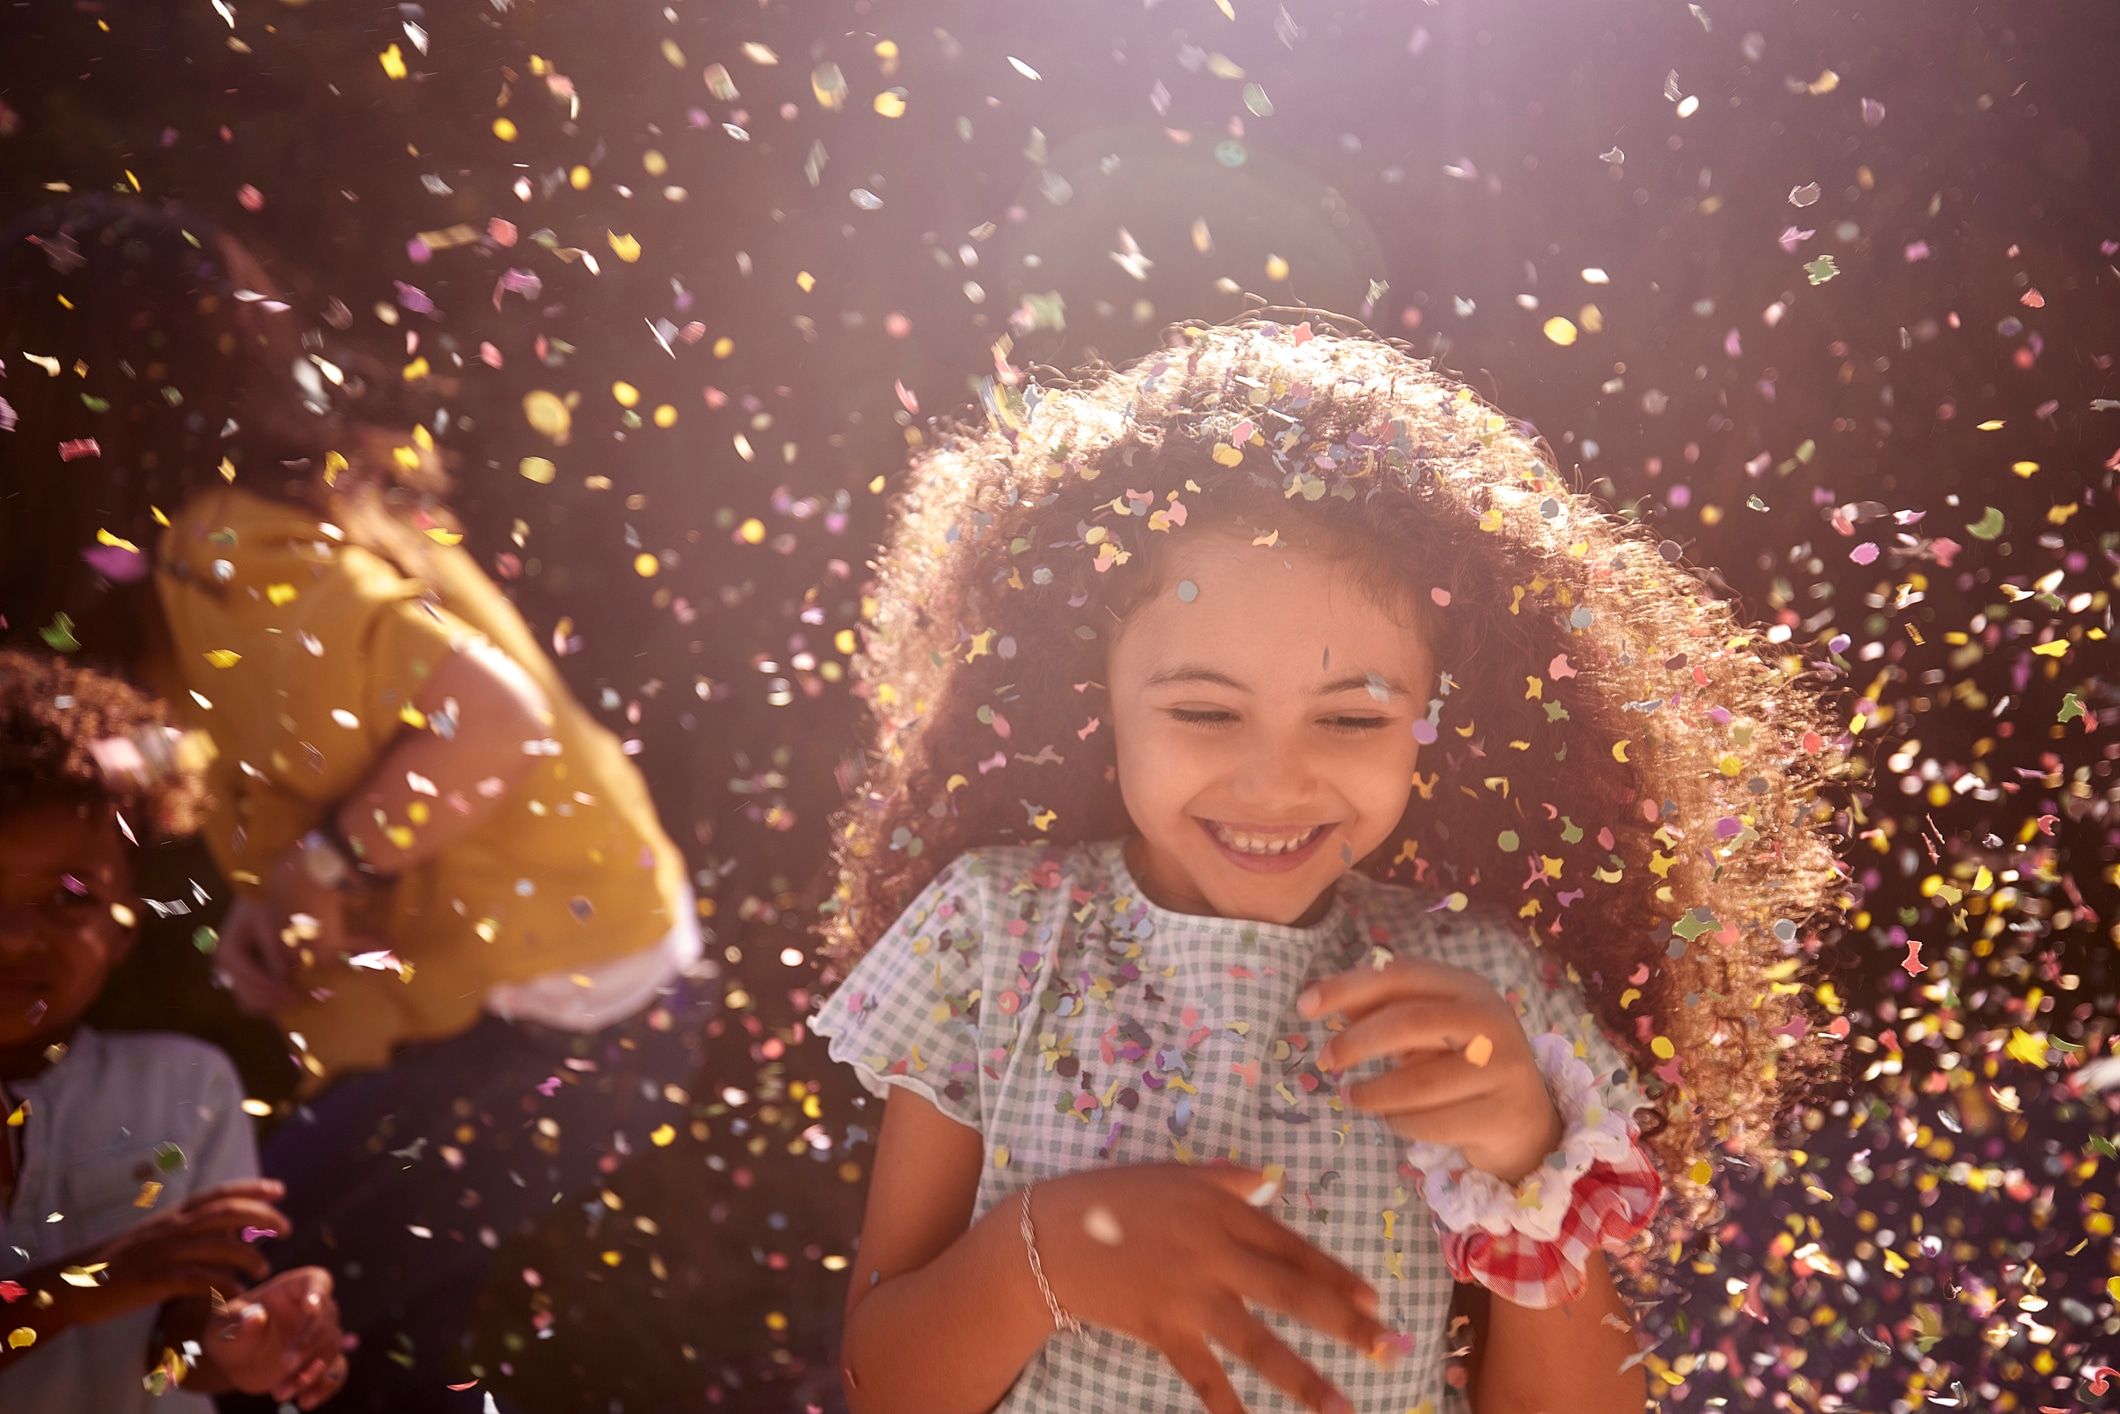 17 party ideas for babysitters watching kids this New Year’s Eve